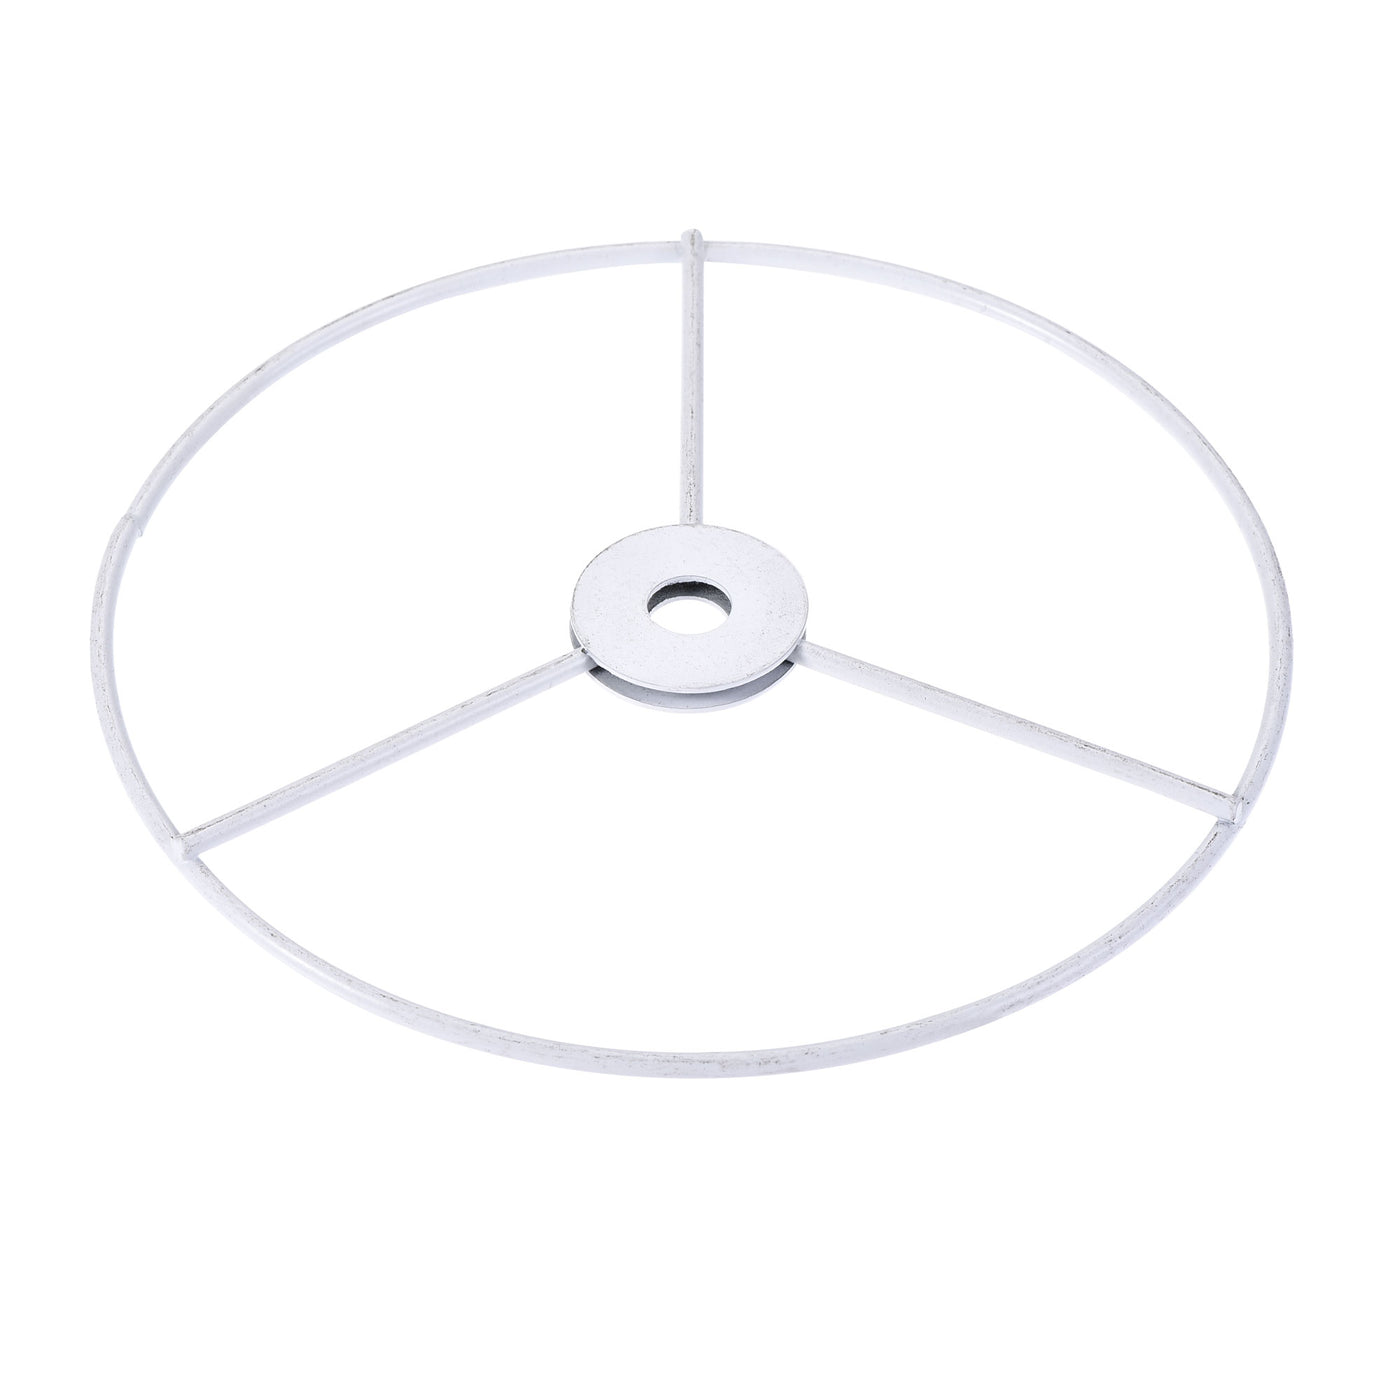 uxcell Uxcell Lamp Shade Ring, 150mm Dia. Lampshade Holder Frame for Connecting Lamps Harp, Baked Coating Iron 2 Set